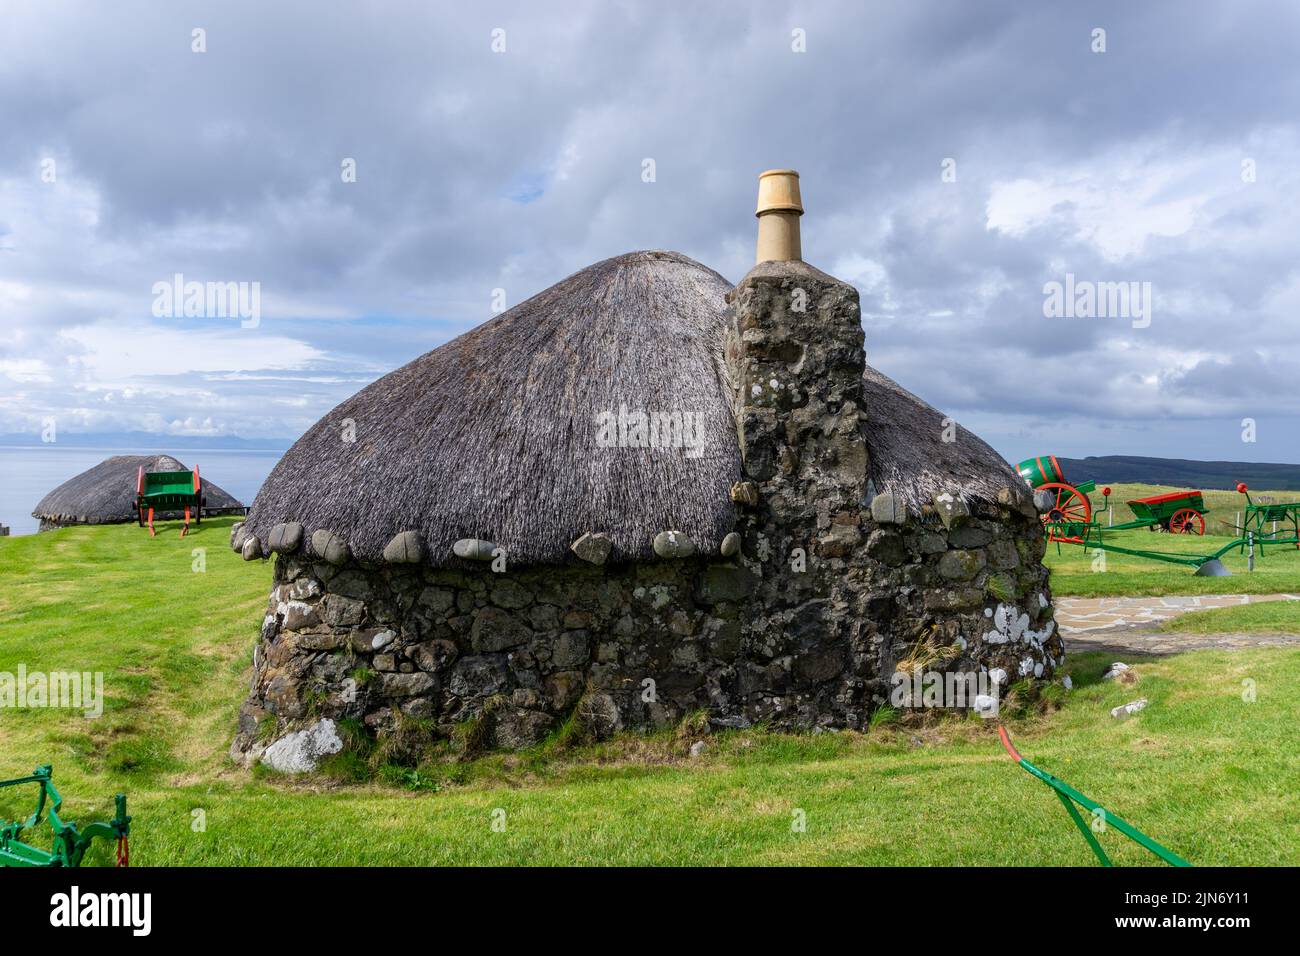 Kilmuir, United Kingdom - 1 July, 2022: close-up view of a typical crofter cottage with thick stone walls and a thatched reed roof Stock Photo